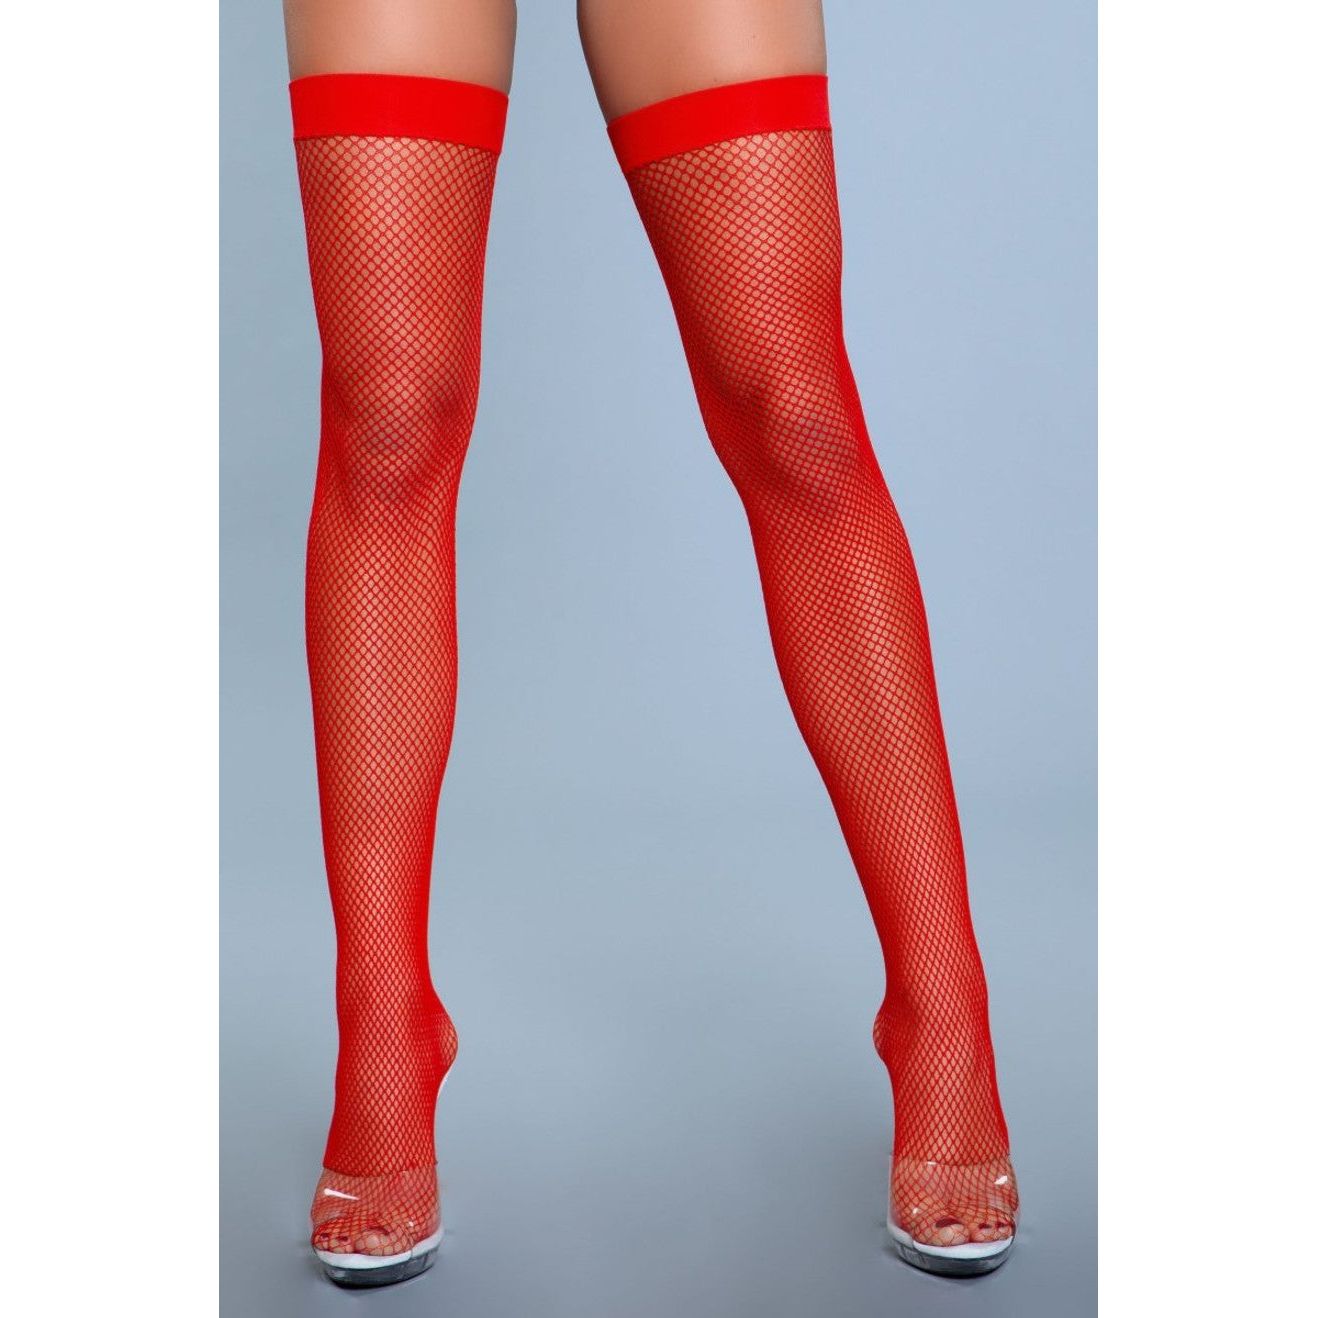 Nylon Fishnet Thigh Highs by Be Wicked